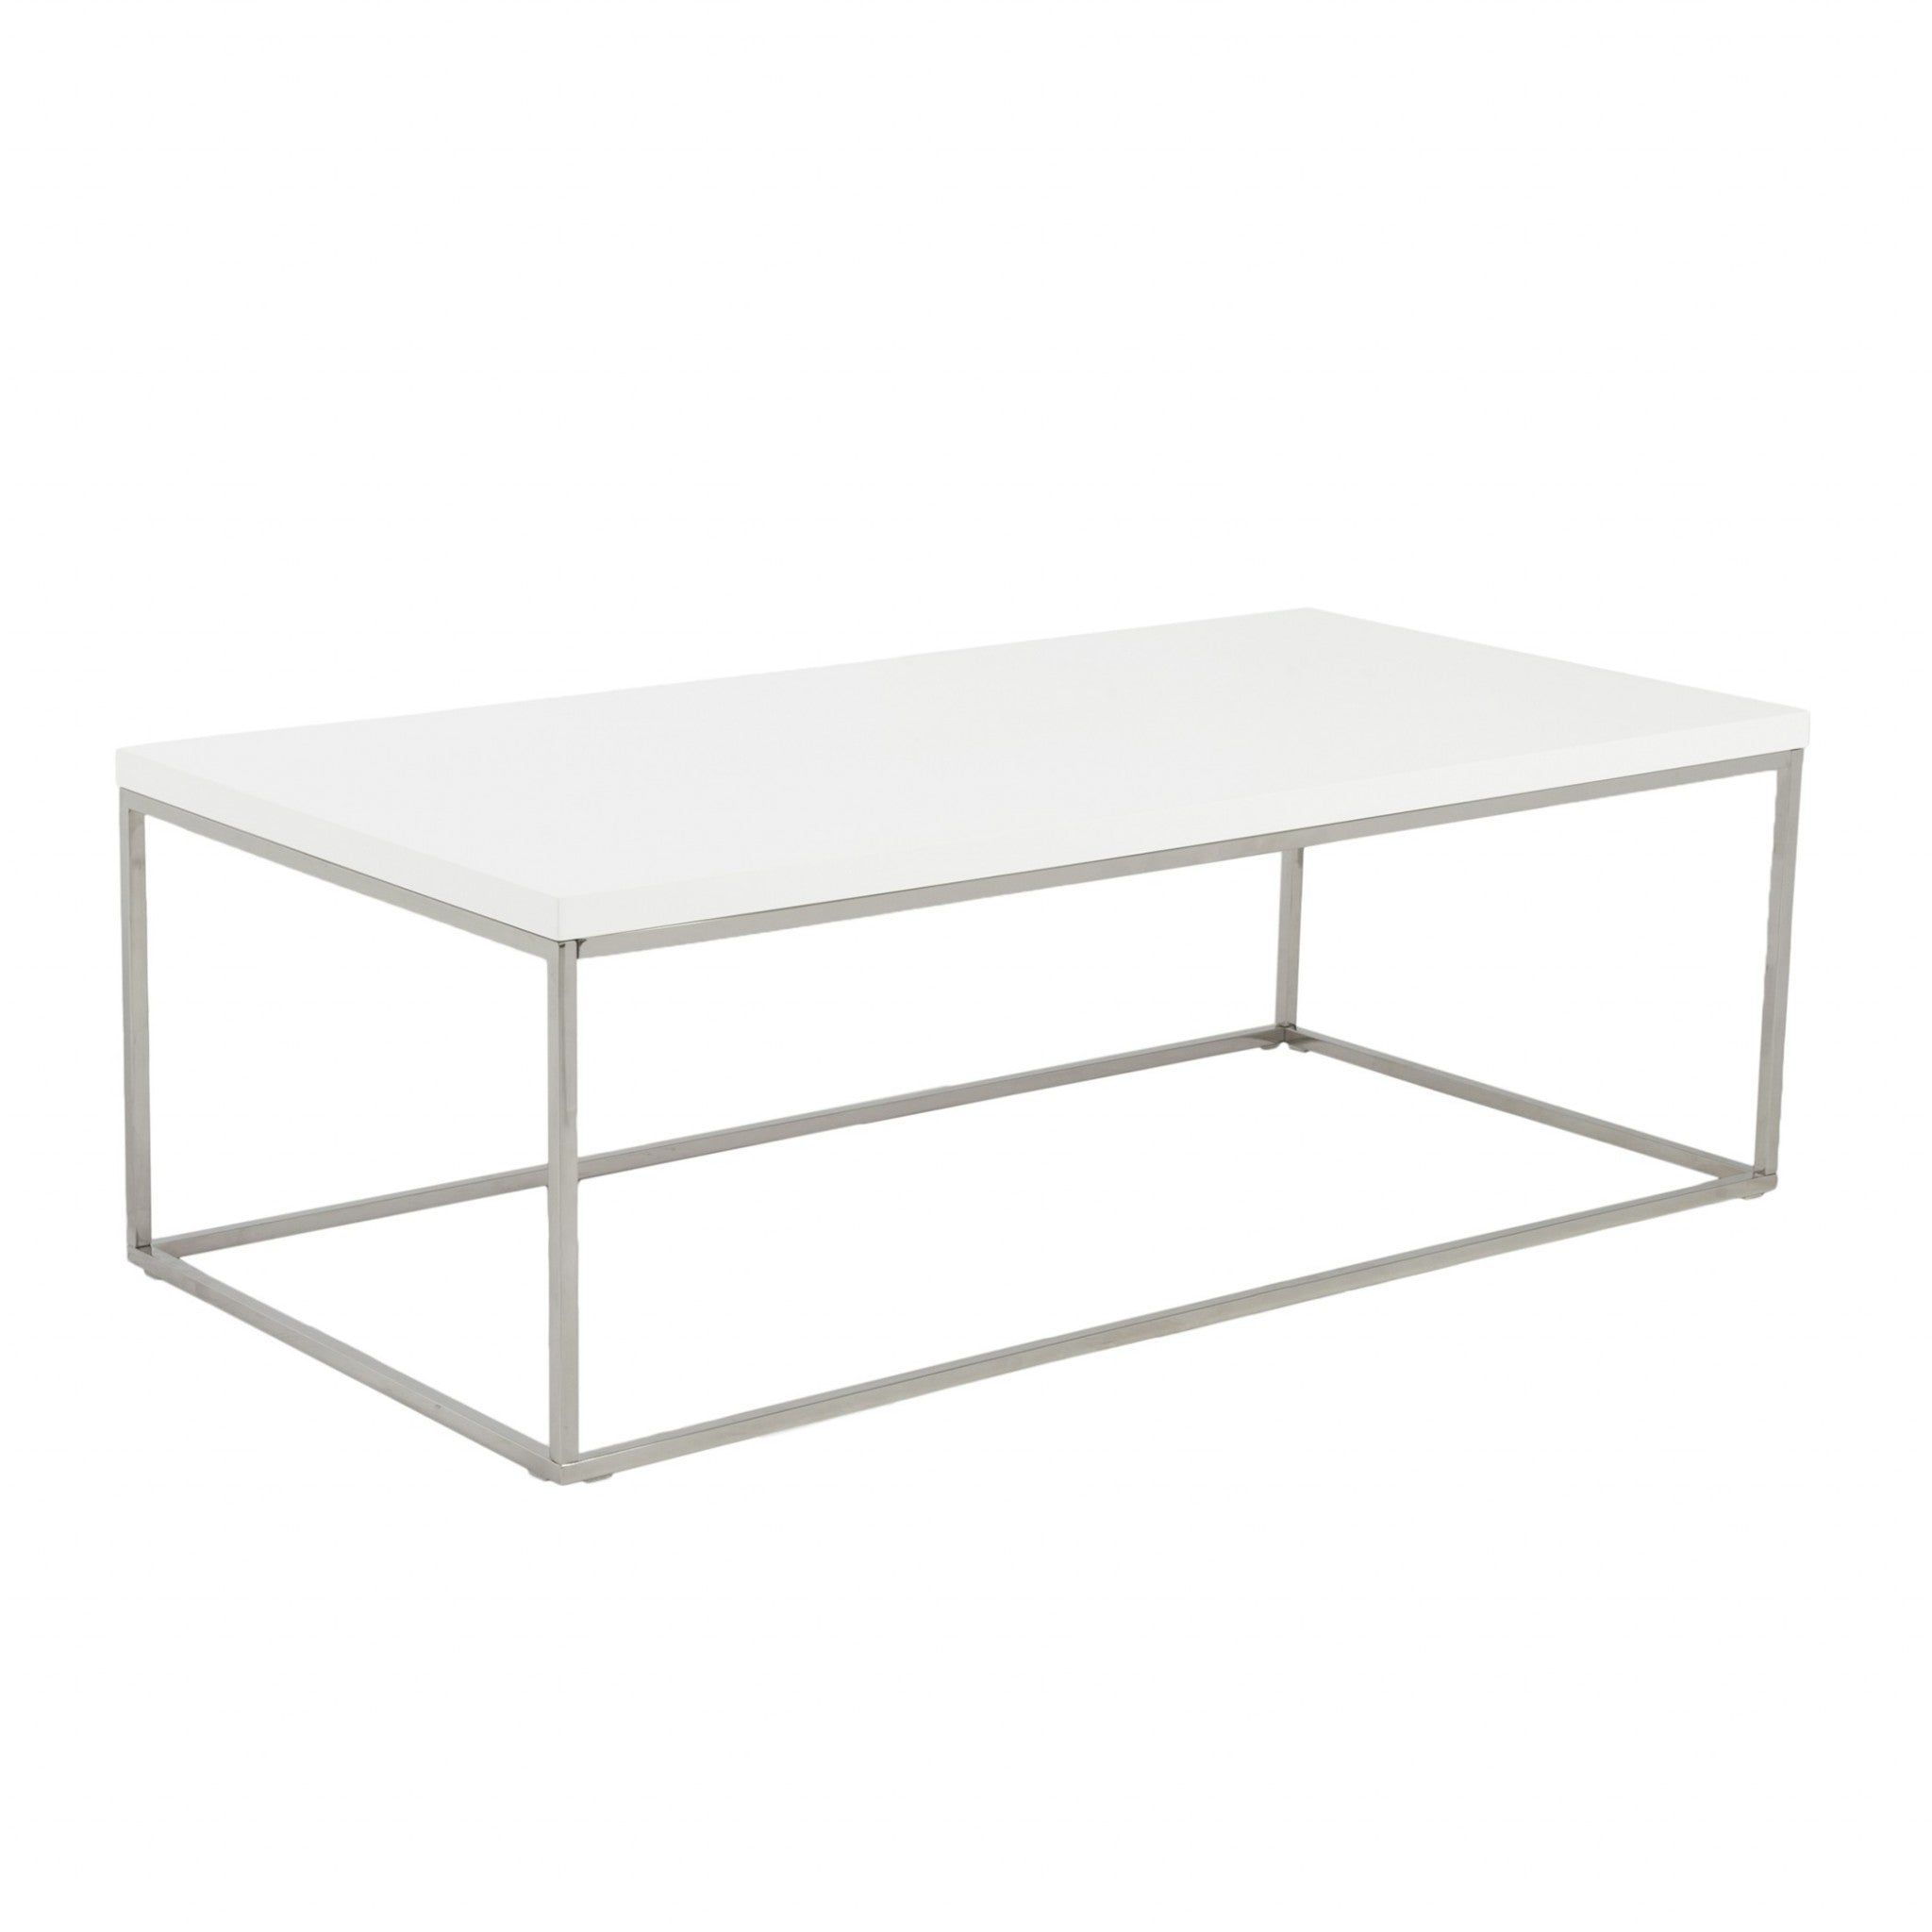 47" White And Silver Metal Coffee Table